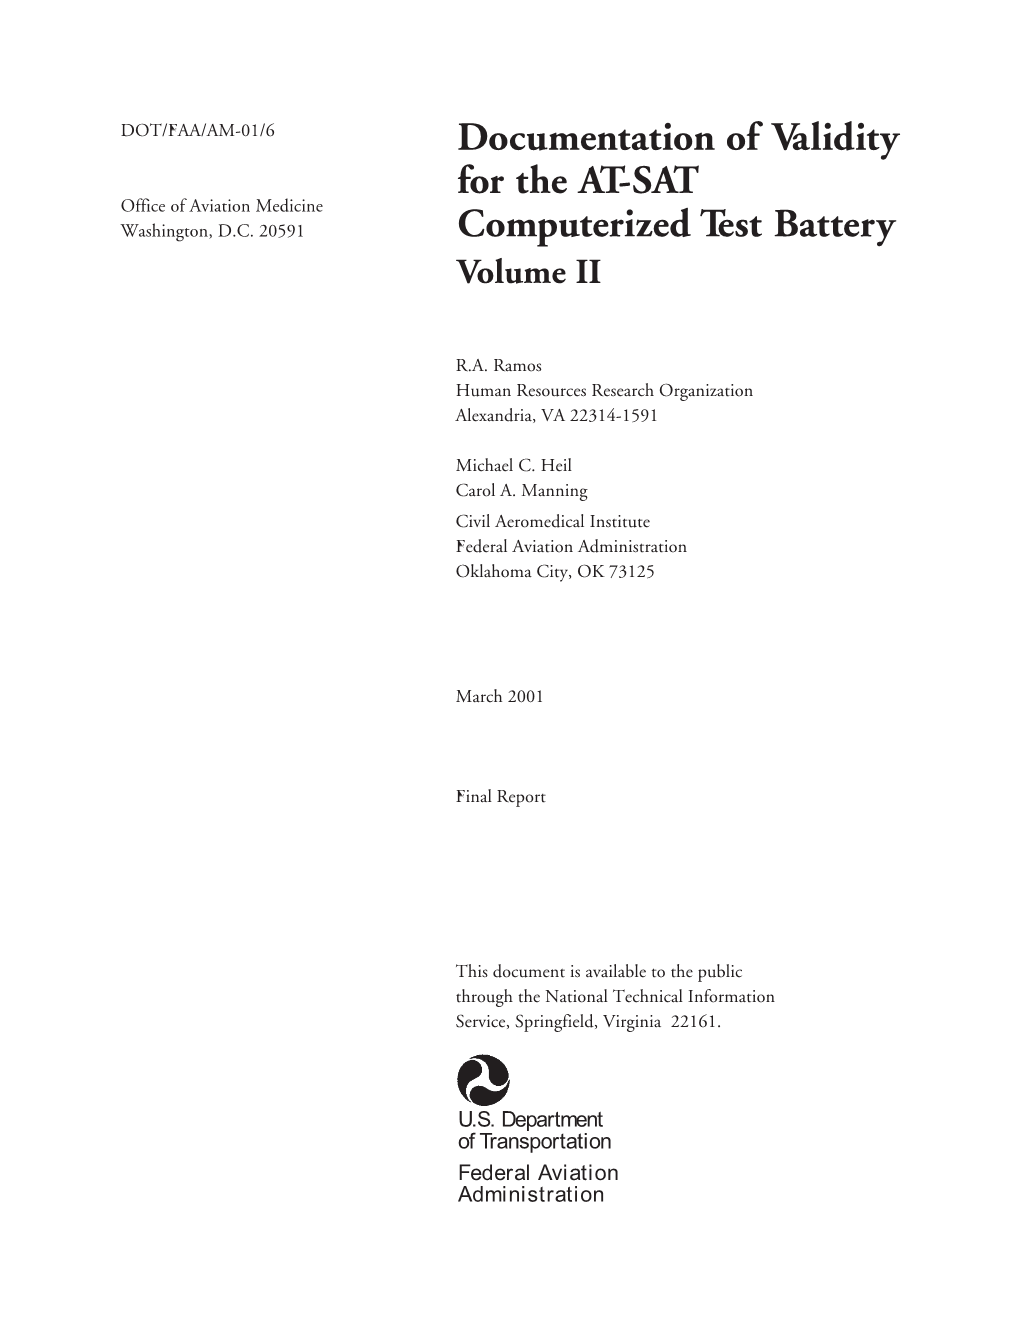 Documentation of Validity for the AT-SAT Computerized Test Battery